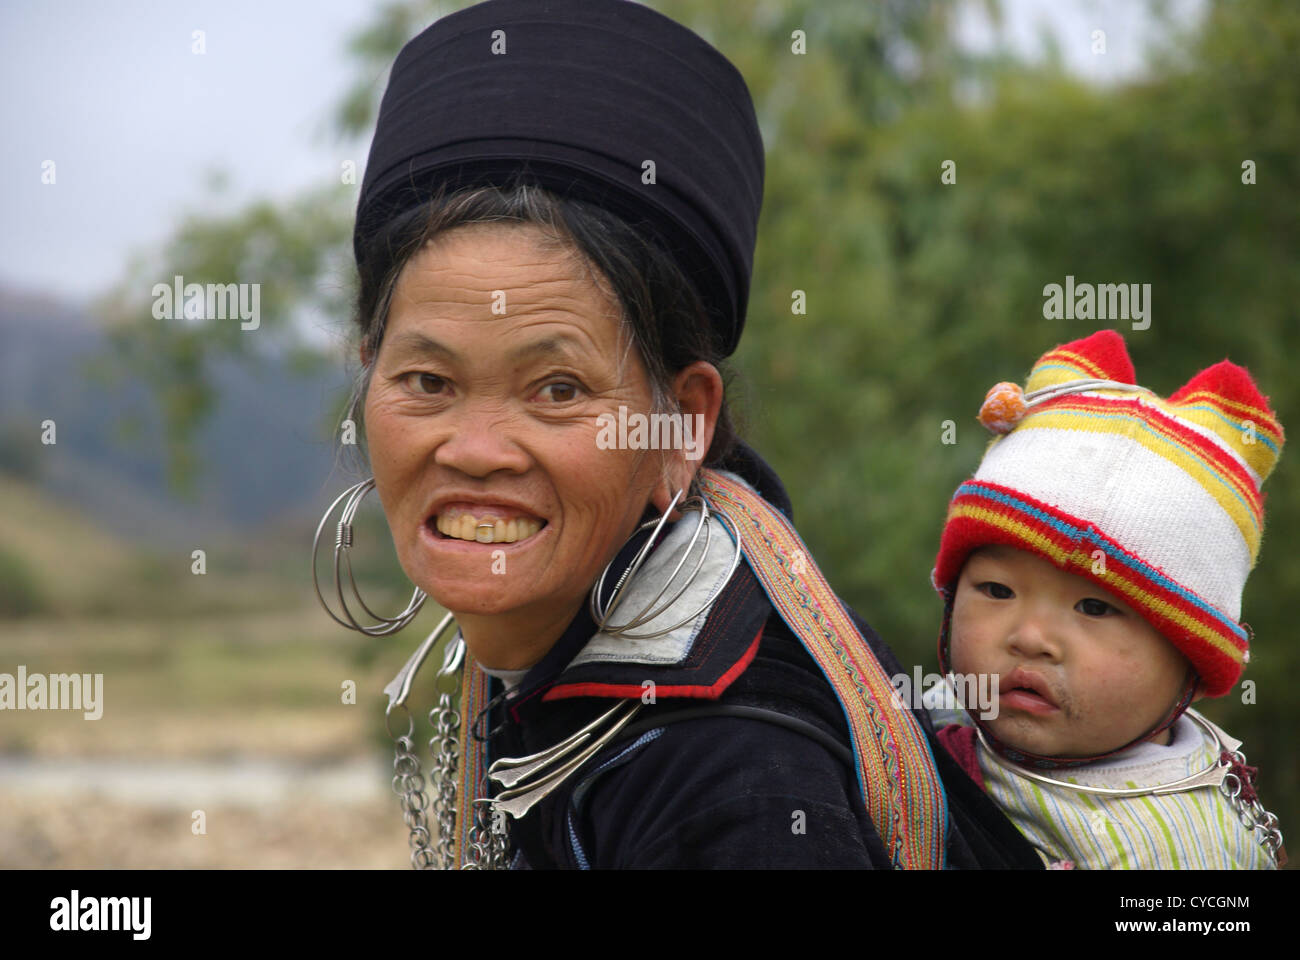 Vietnam, Sapa Market, Black Hmong woman and child in traditional dress Stock Photo